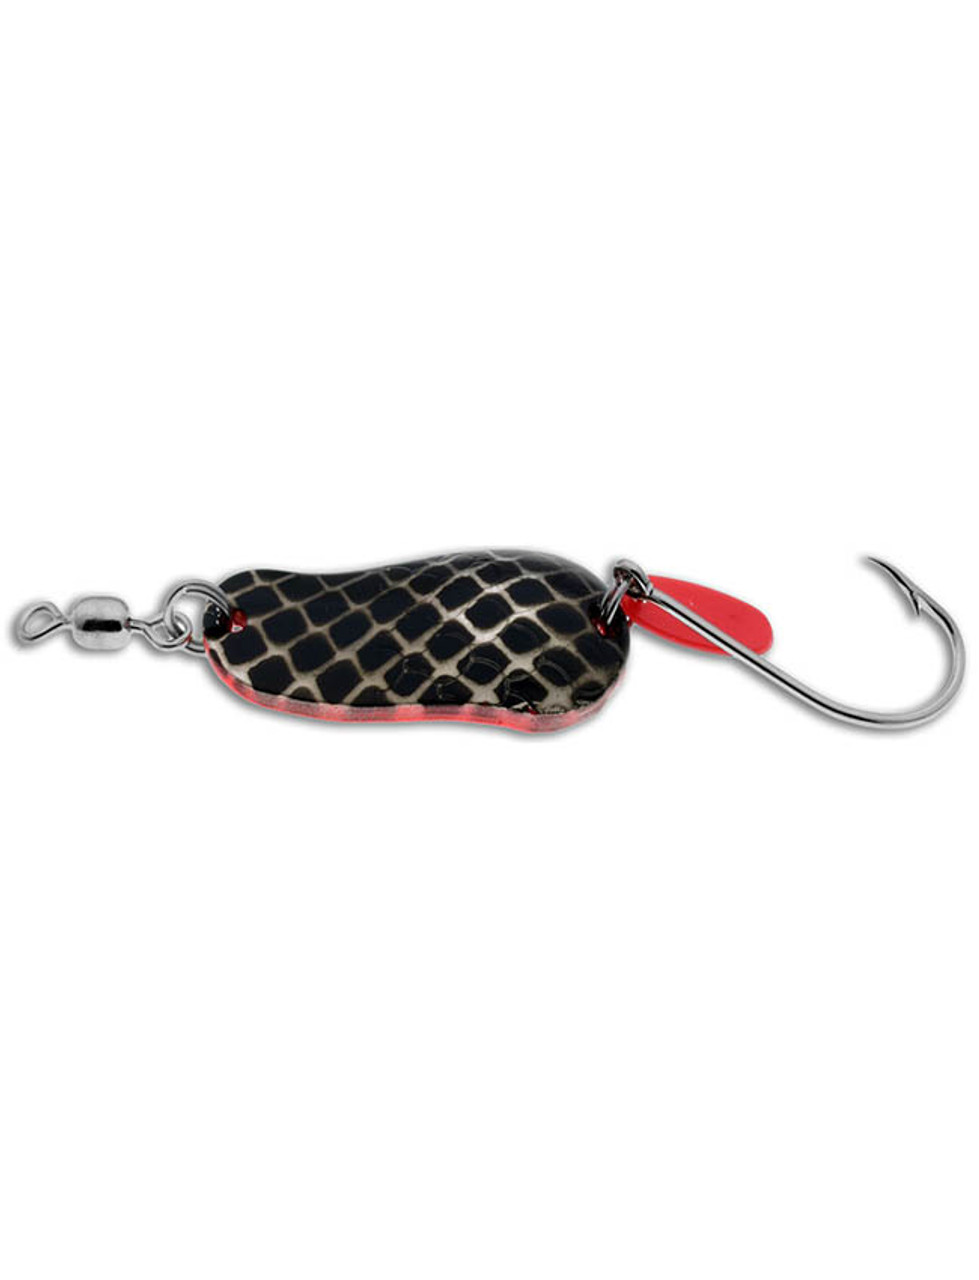 Gibbs Kit-A-Mat #55 (3/4oz) Black Scale Red Back - The Harbour Chandler